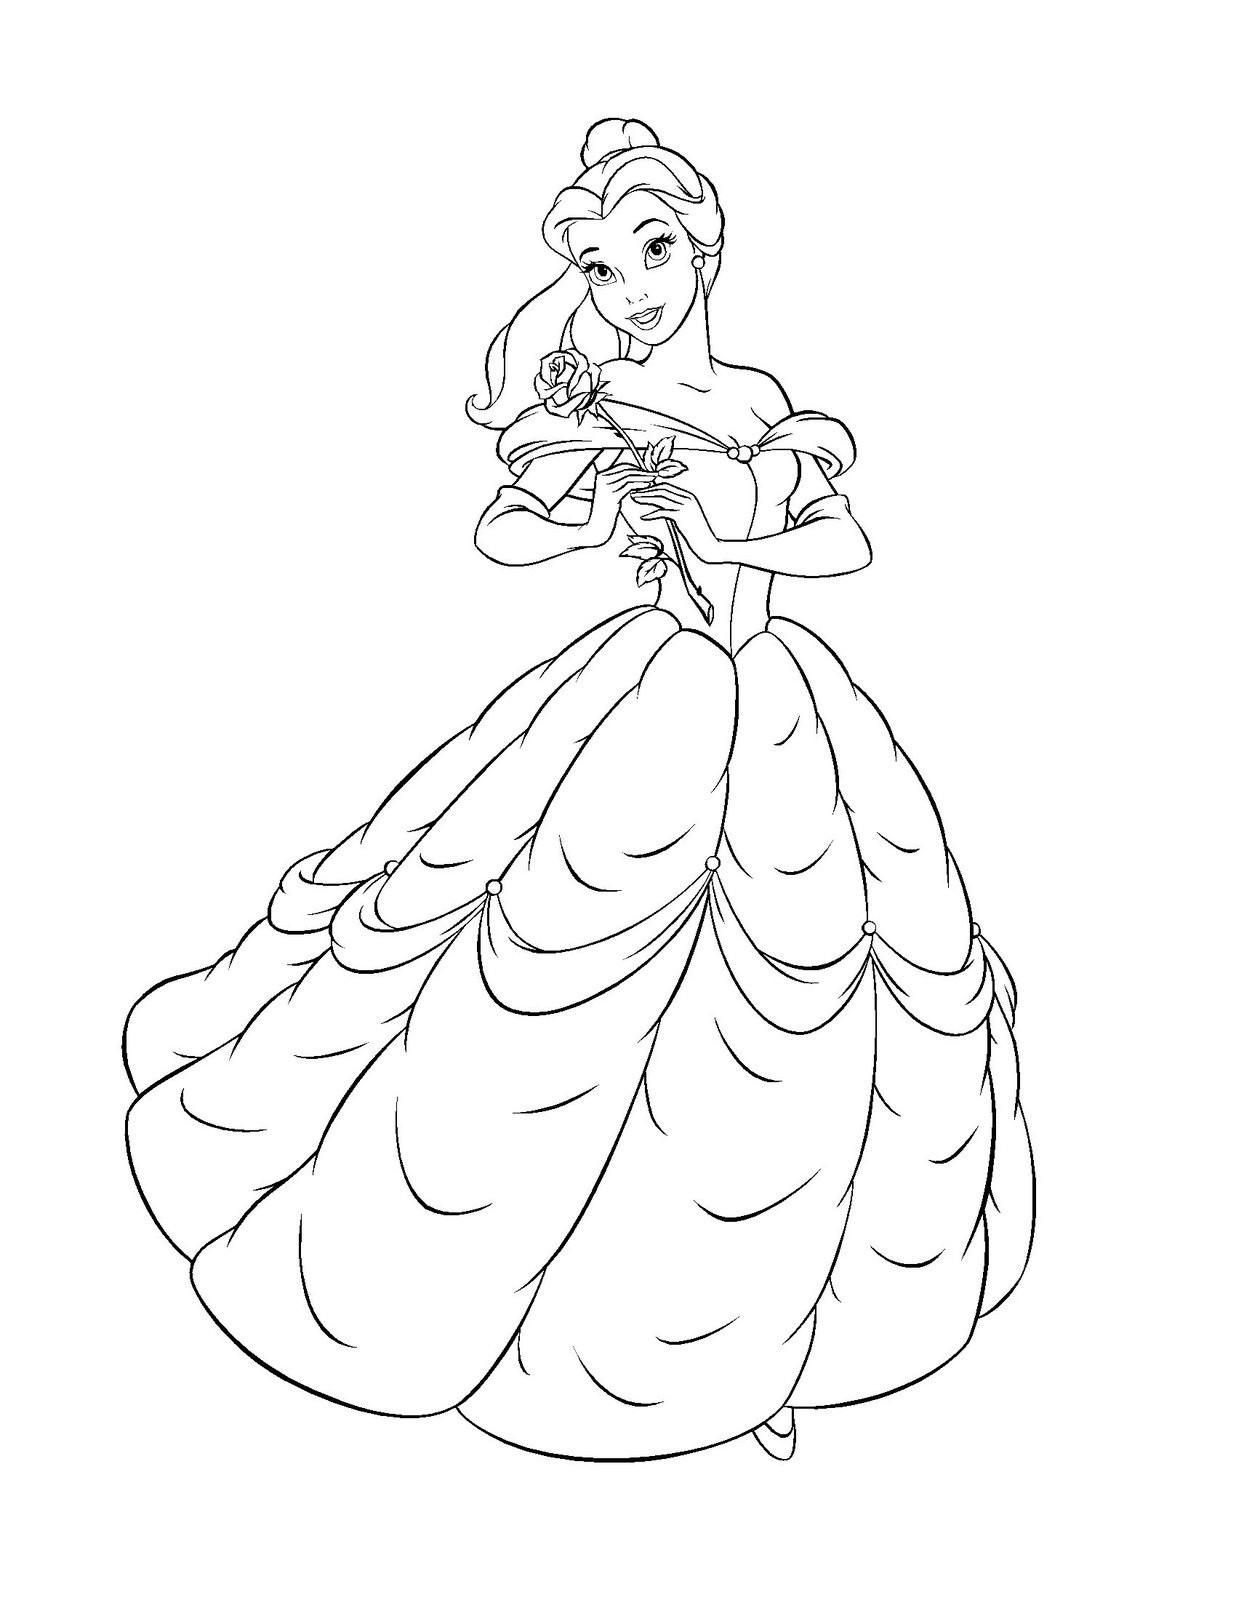 Belle Coloring Sheets For Girls Printable
 Free Printable Belle Coloring Pages For Kids